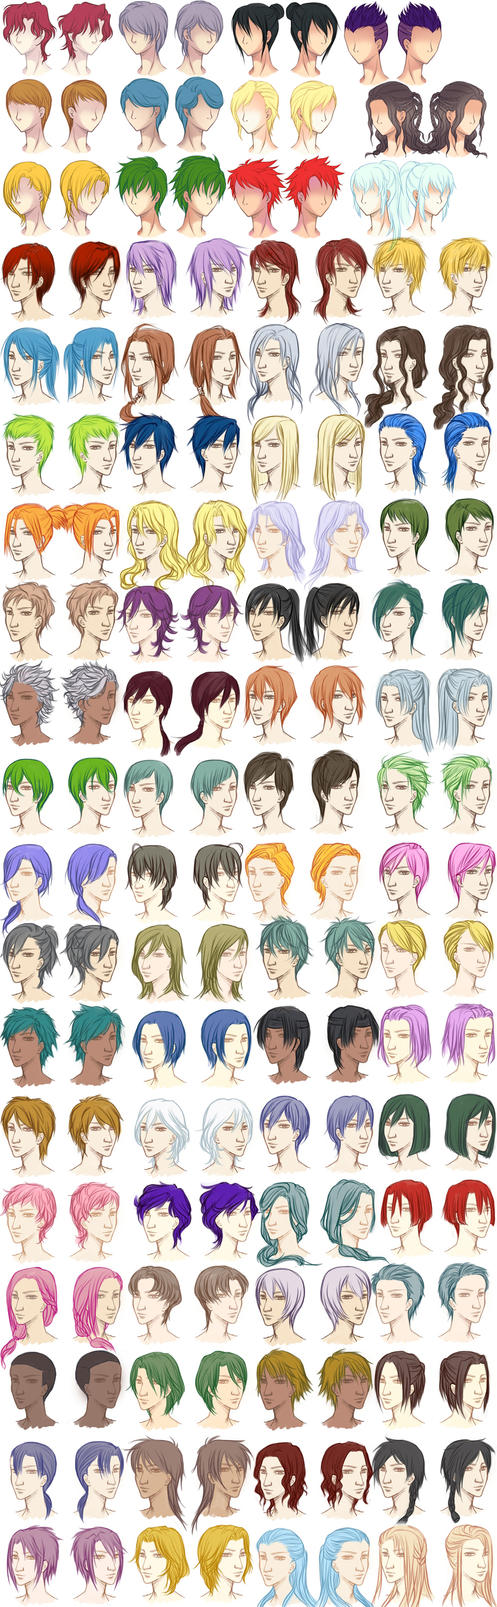 Male Hairstyle Reference Sheet by dawniechi on DeviantArt